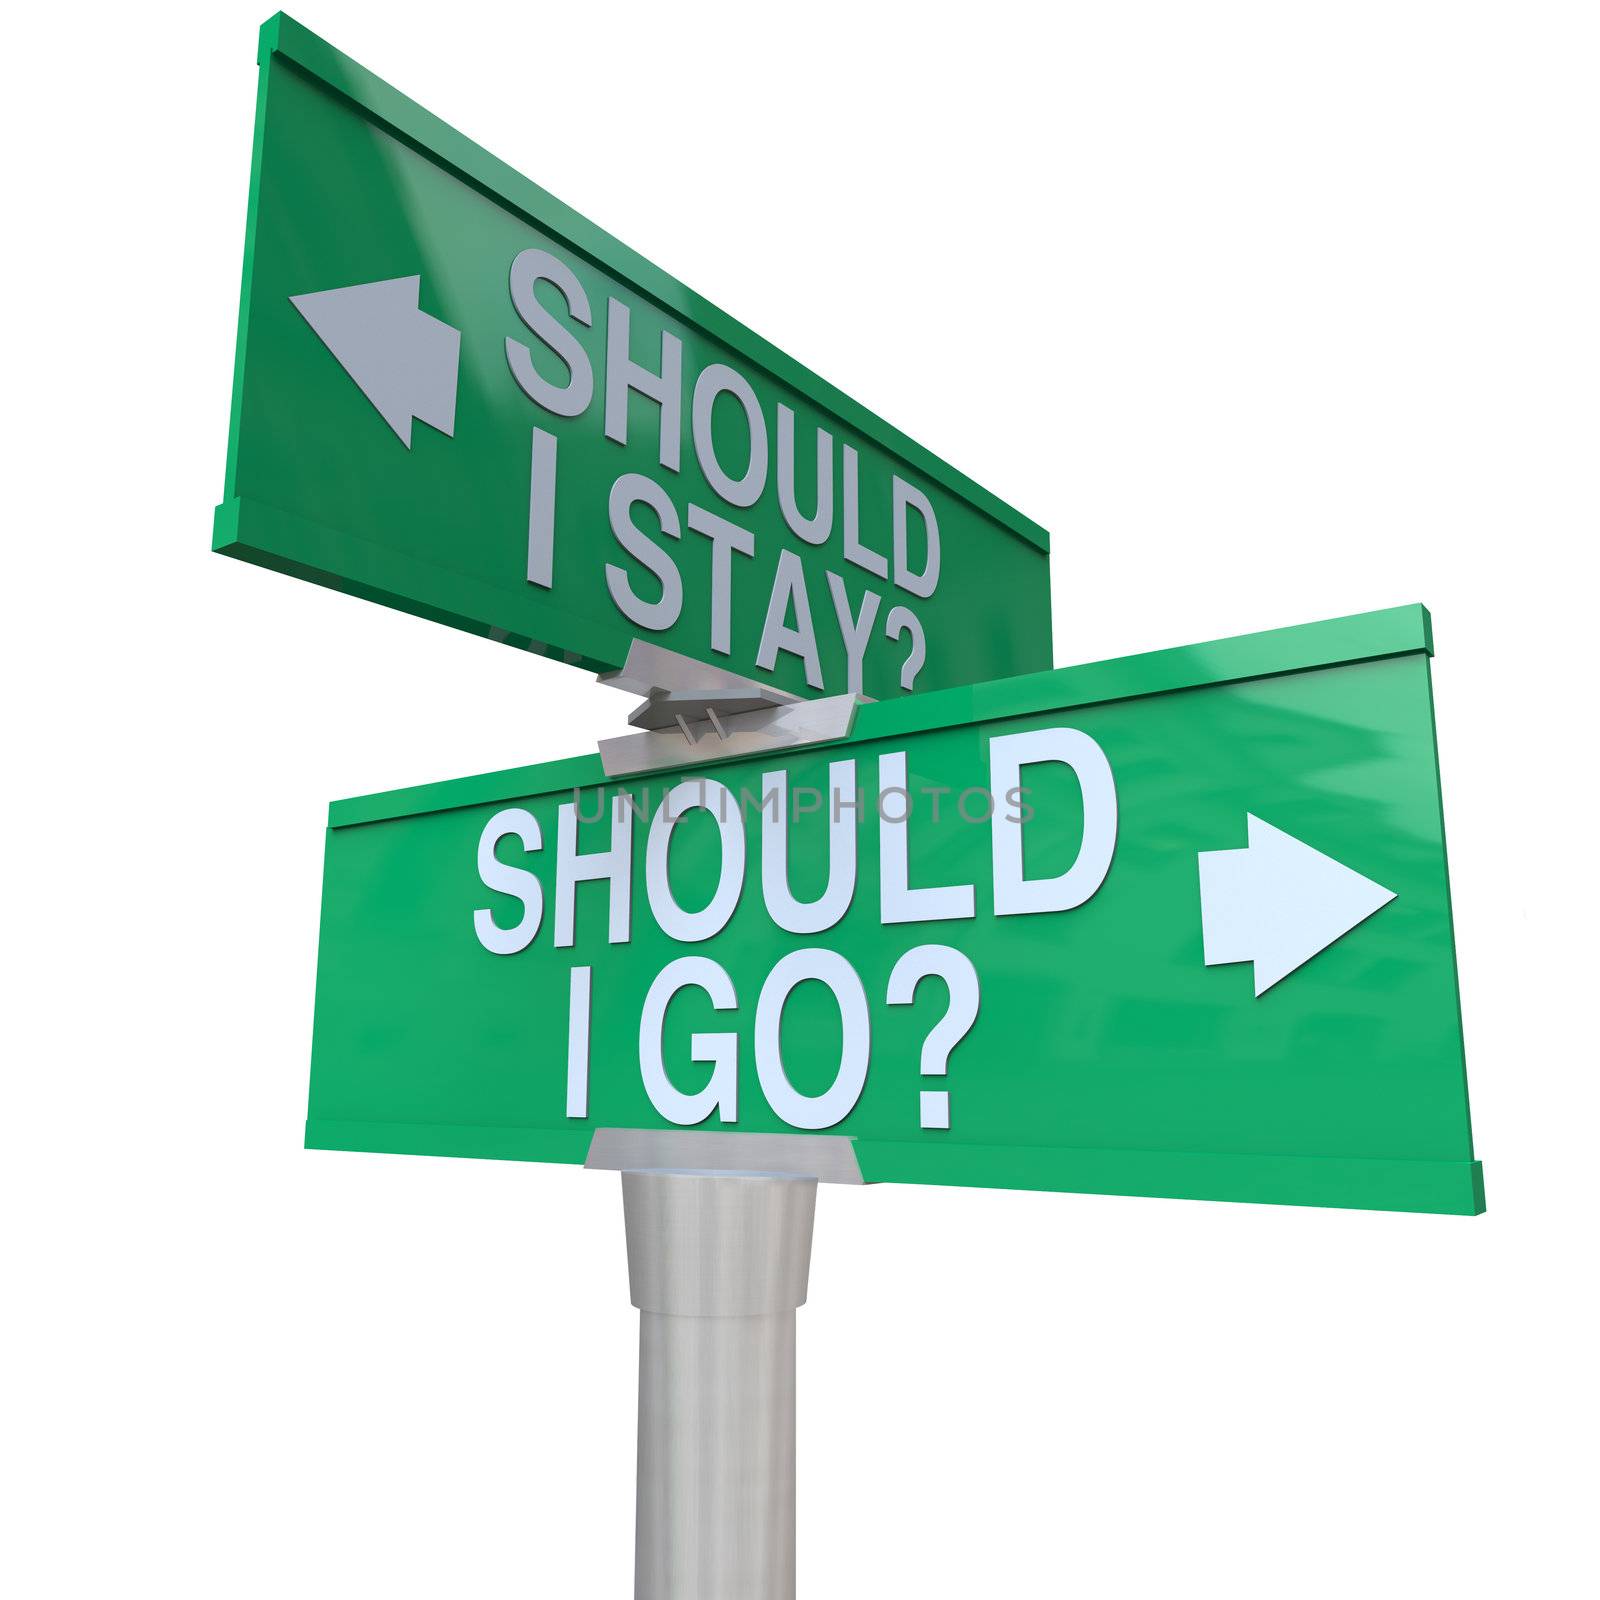 A green two-way street sign pointing to Should I stay or Should I Go with arrows pointing to left or right to compare options